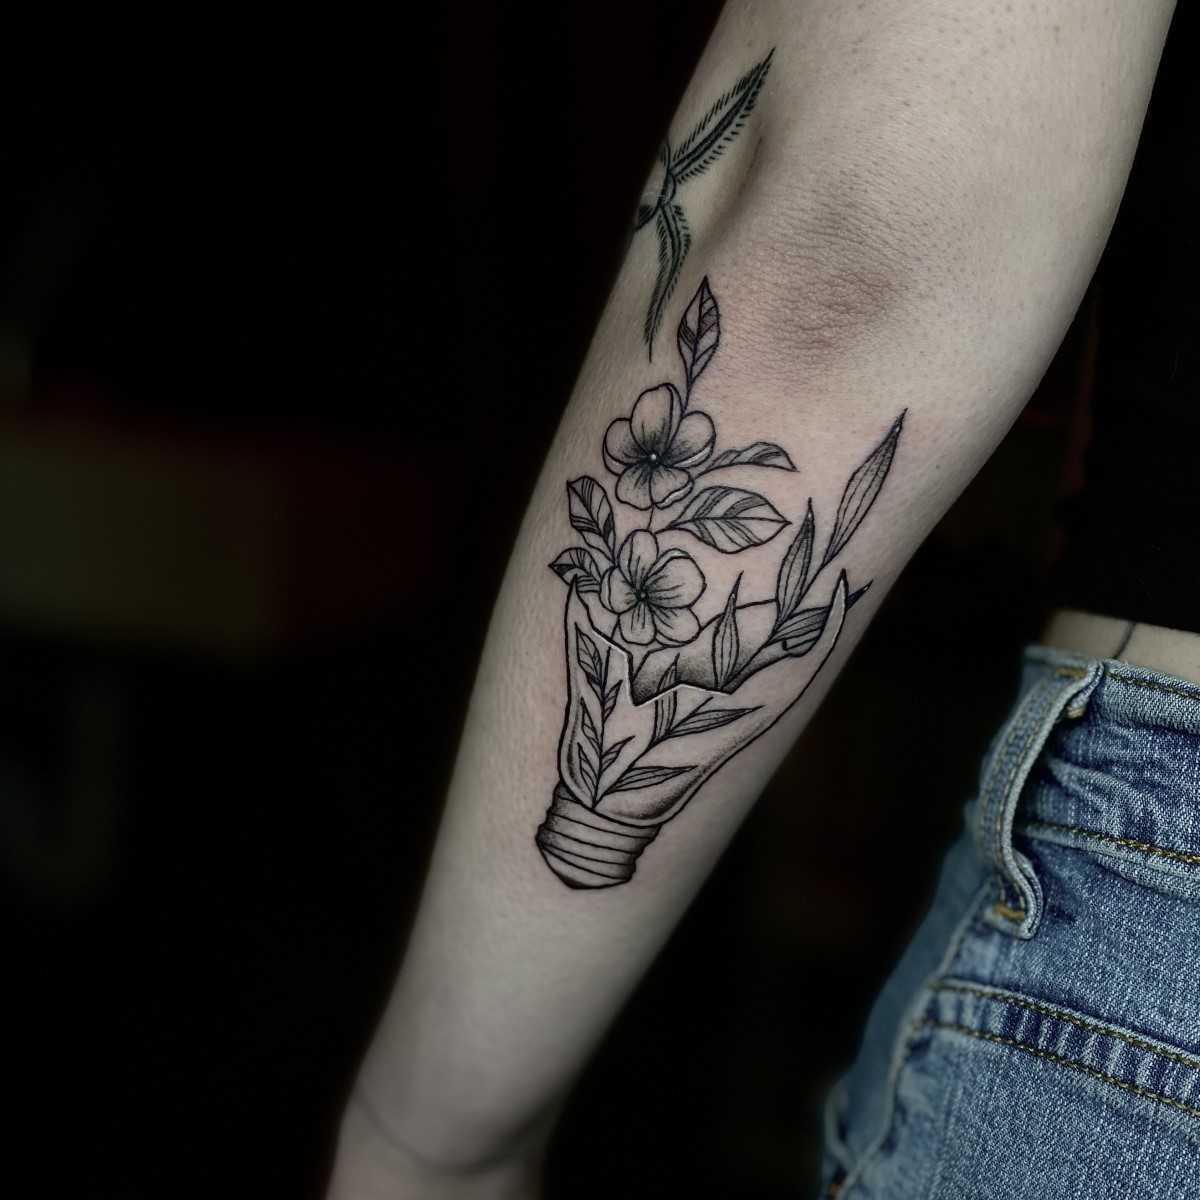 Tattoo by Hailey Marion